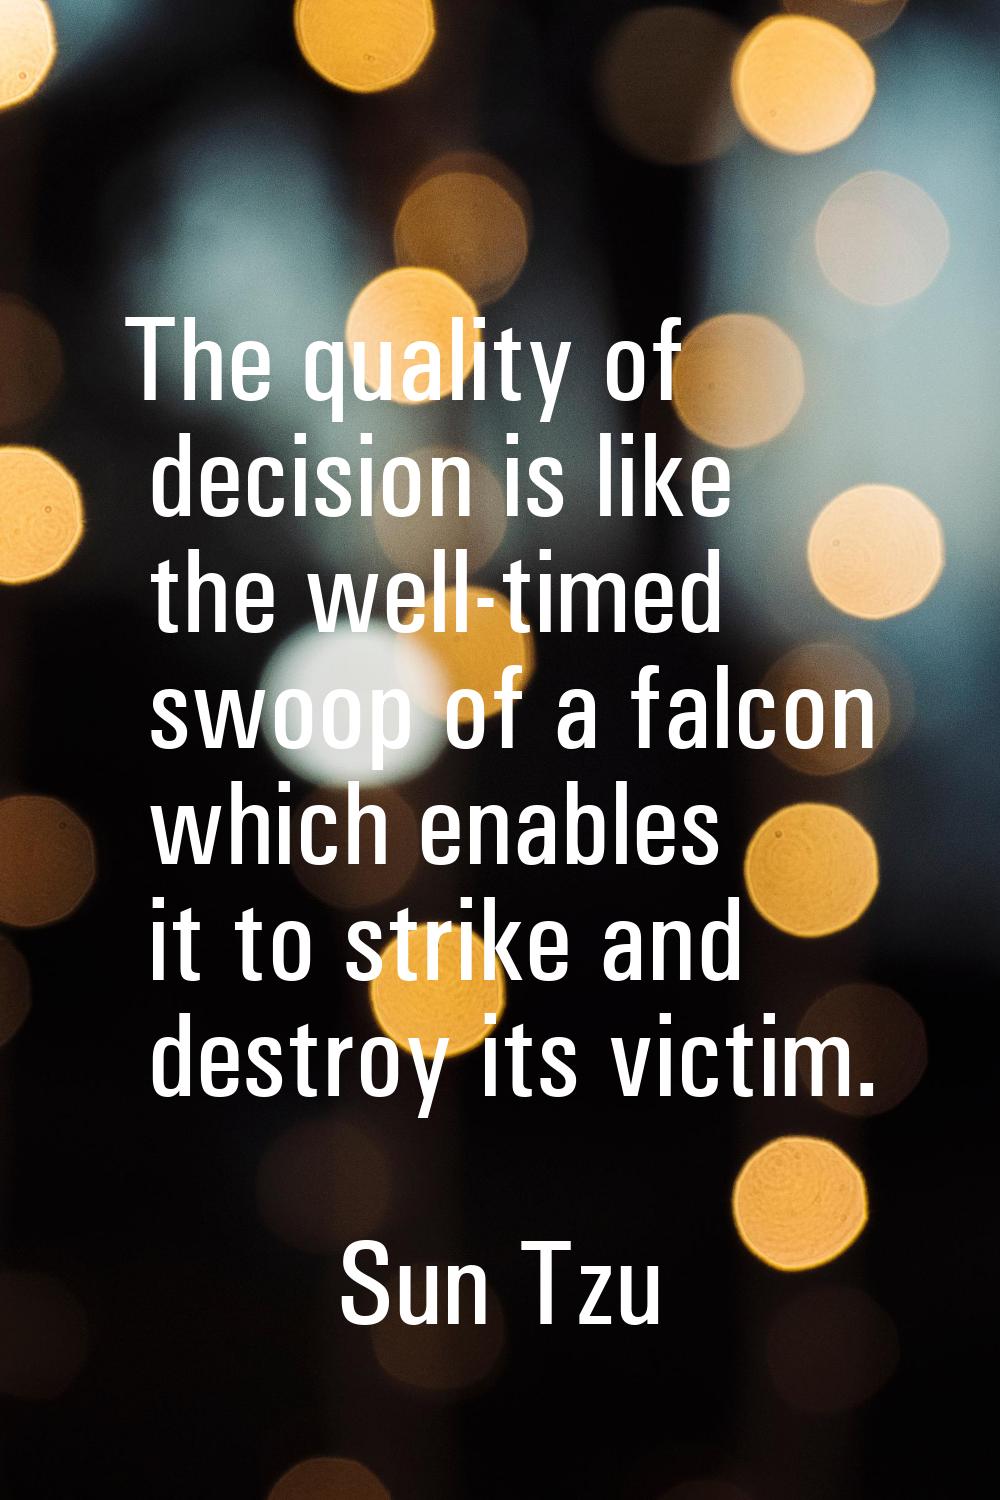 The quality of decision is like the well-timed swoop of a falcon which enables it to strike and des